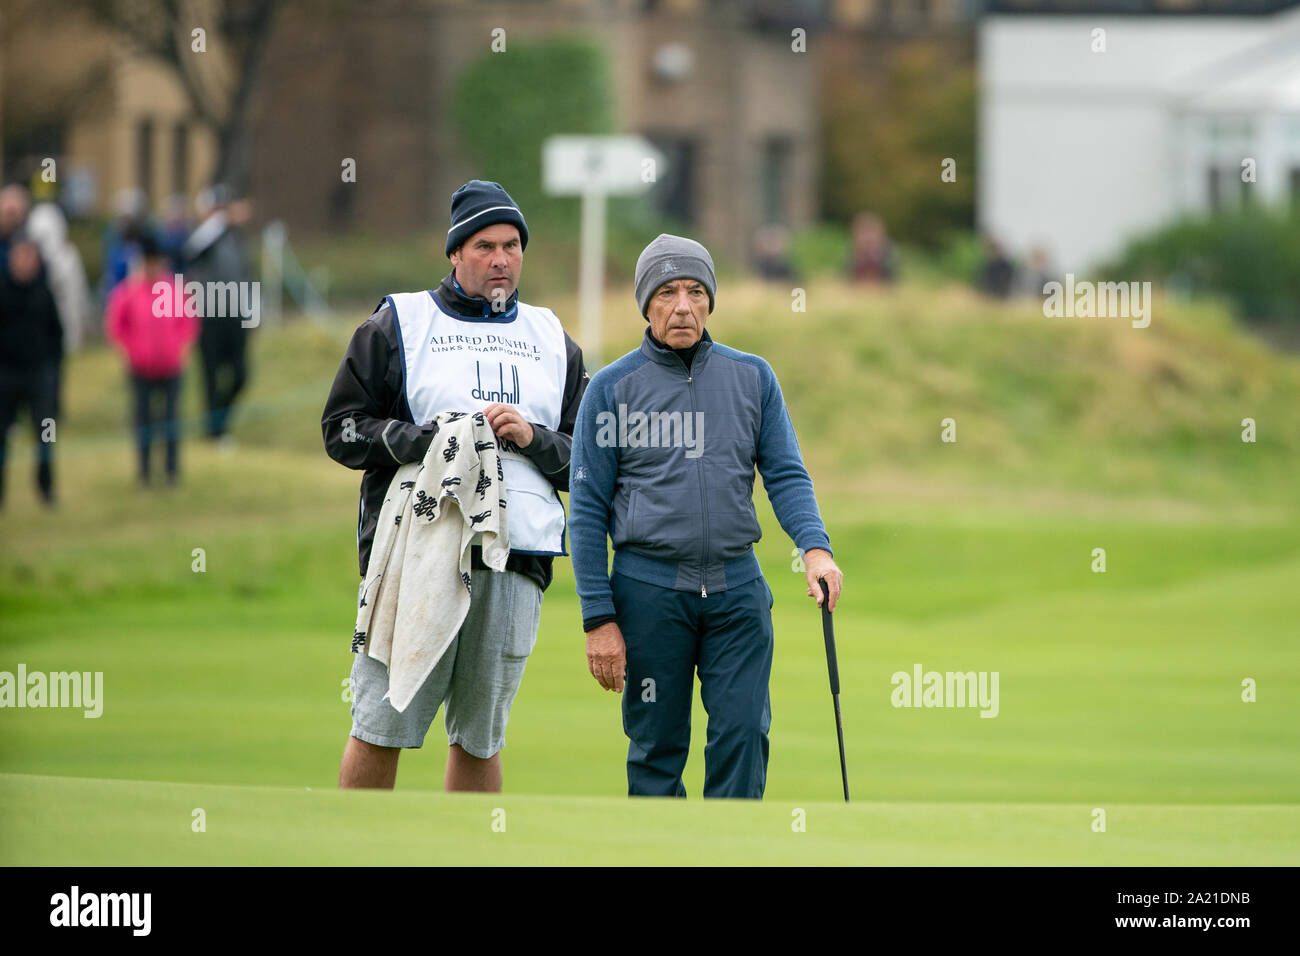 Norbert Dentressangle lines up his putt during day four of the Alfred Dunhill Links Championship at St Andrews. PA Photo. Picture date: Sunday September 29, 2019. See PA story GOLF Dunhill. Photo credit should read: Kenny Smith/PA Wire. RESTRICTIONS: Editorial use only. No commercial use. Stock Photo